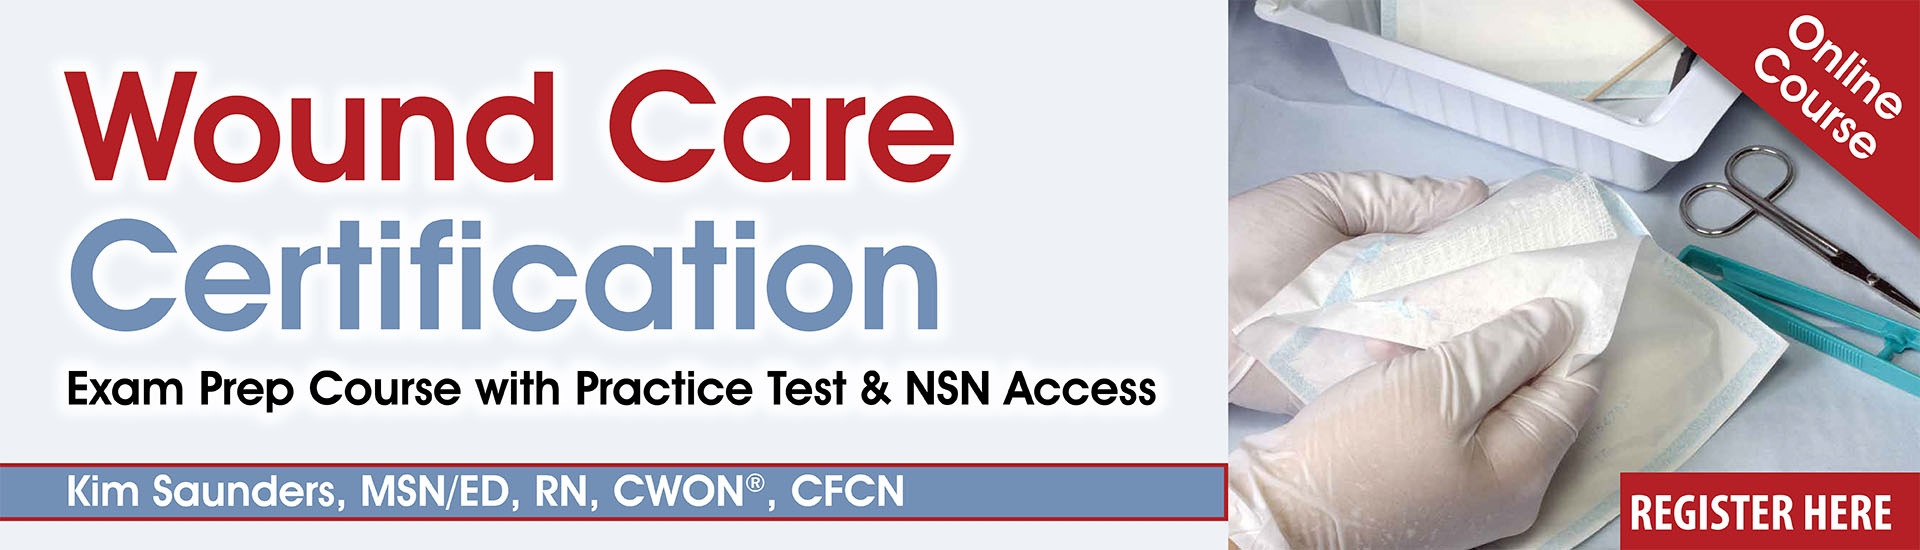 Wound Care Certification: Exam Prep Course with Practice Test & NSN Access